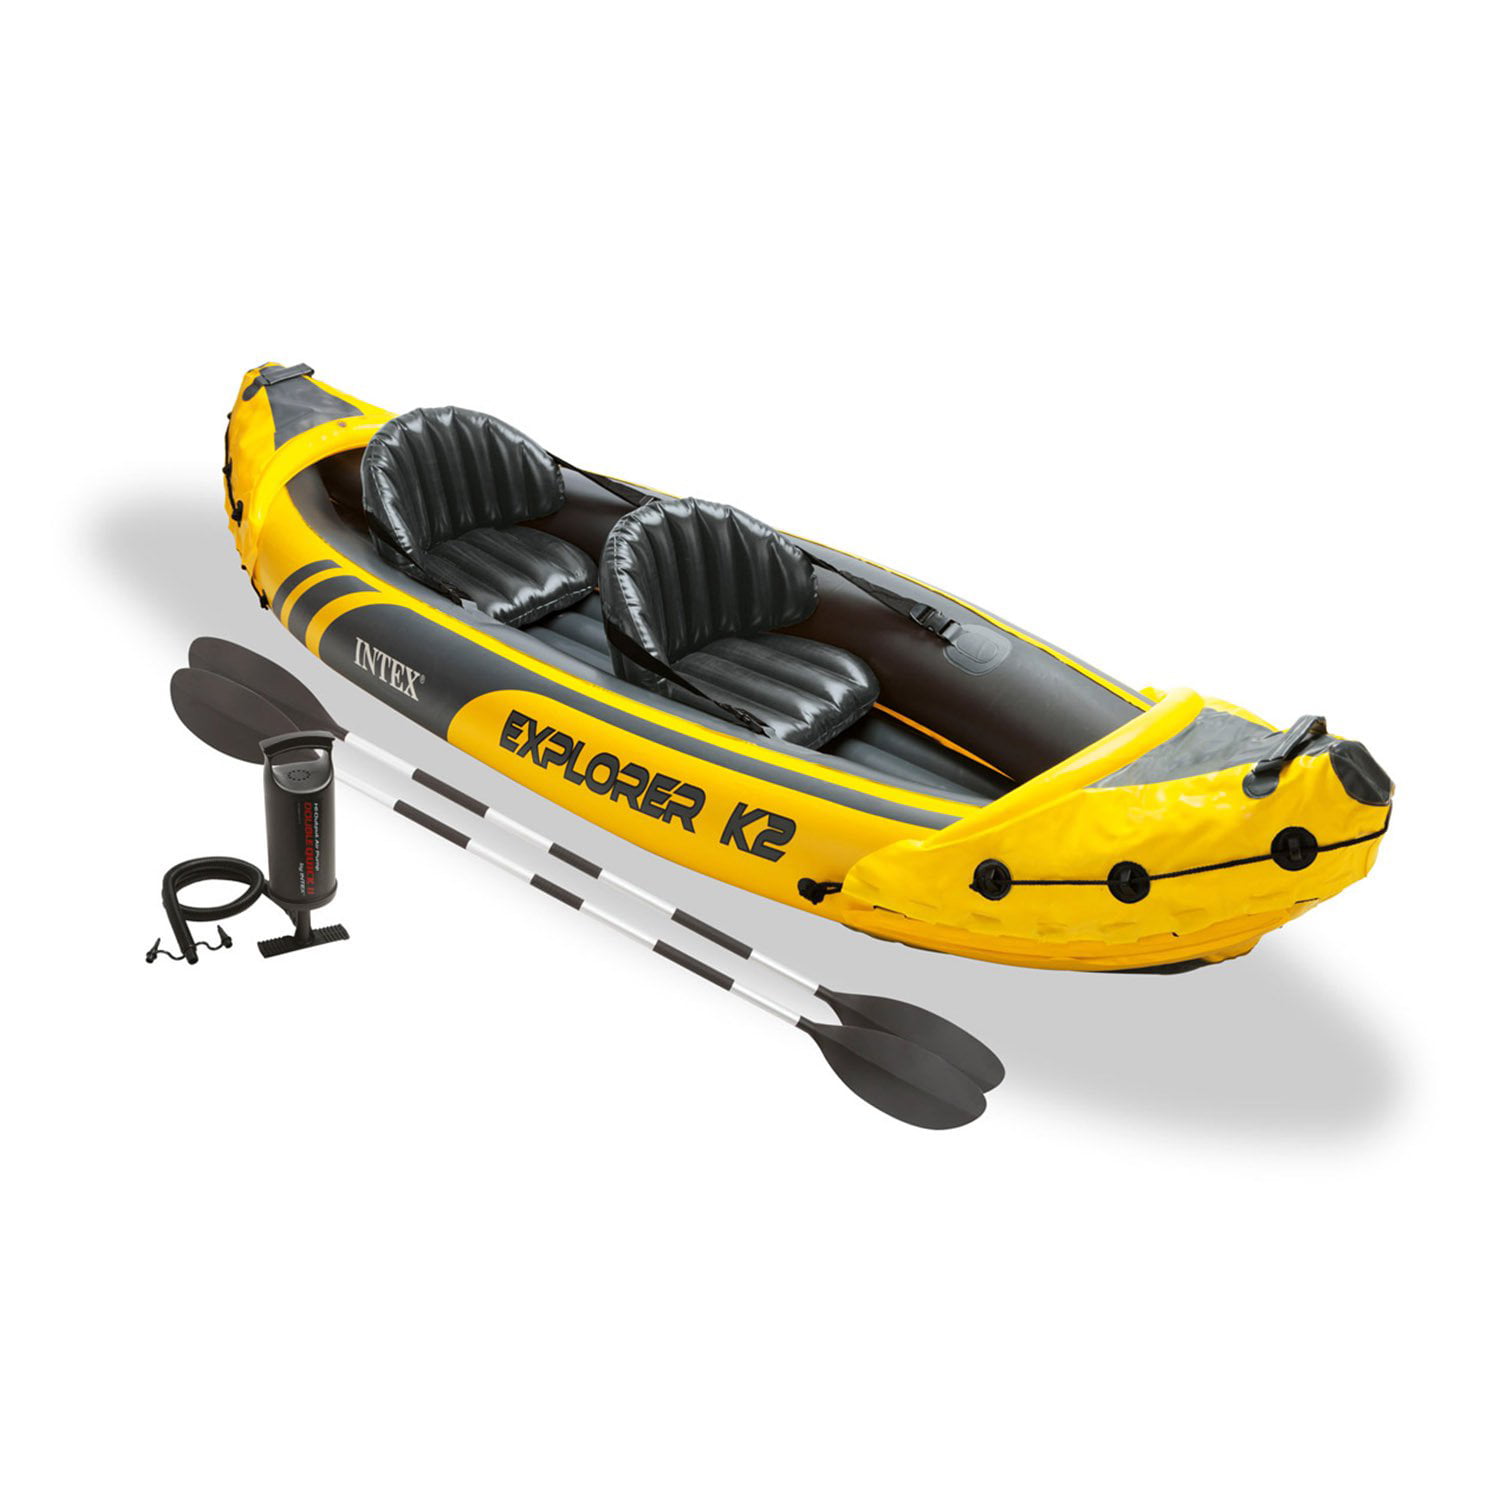 Intex Inflatable Explorer 2-Person Boat w/ Oars & Pump Outdoor Summer Fun Toy 